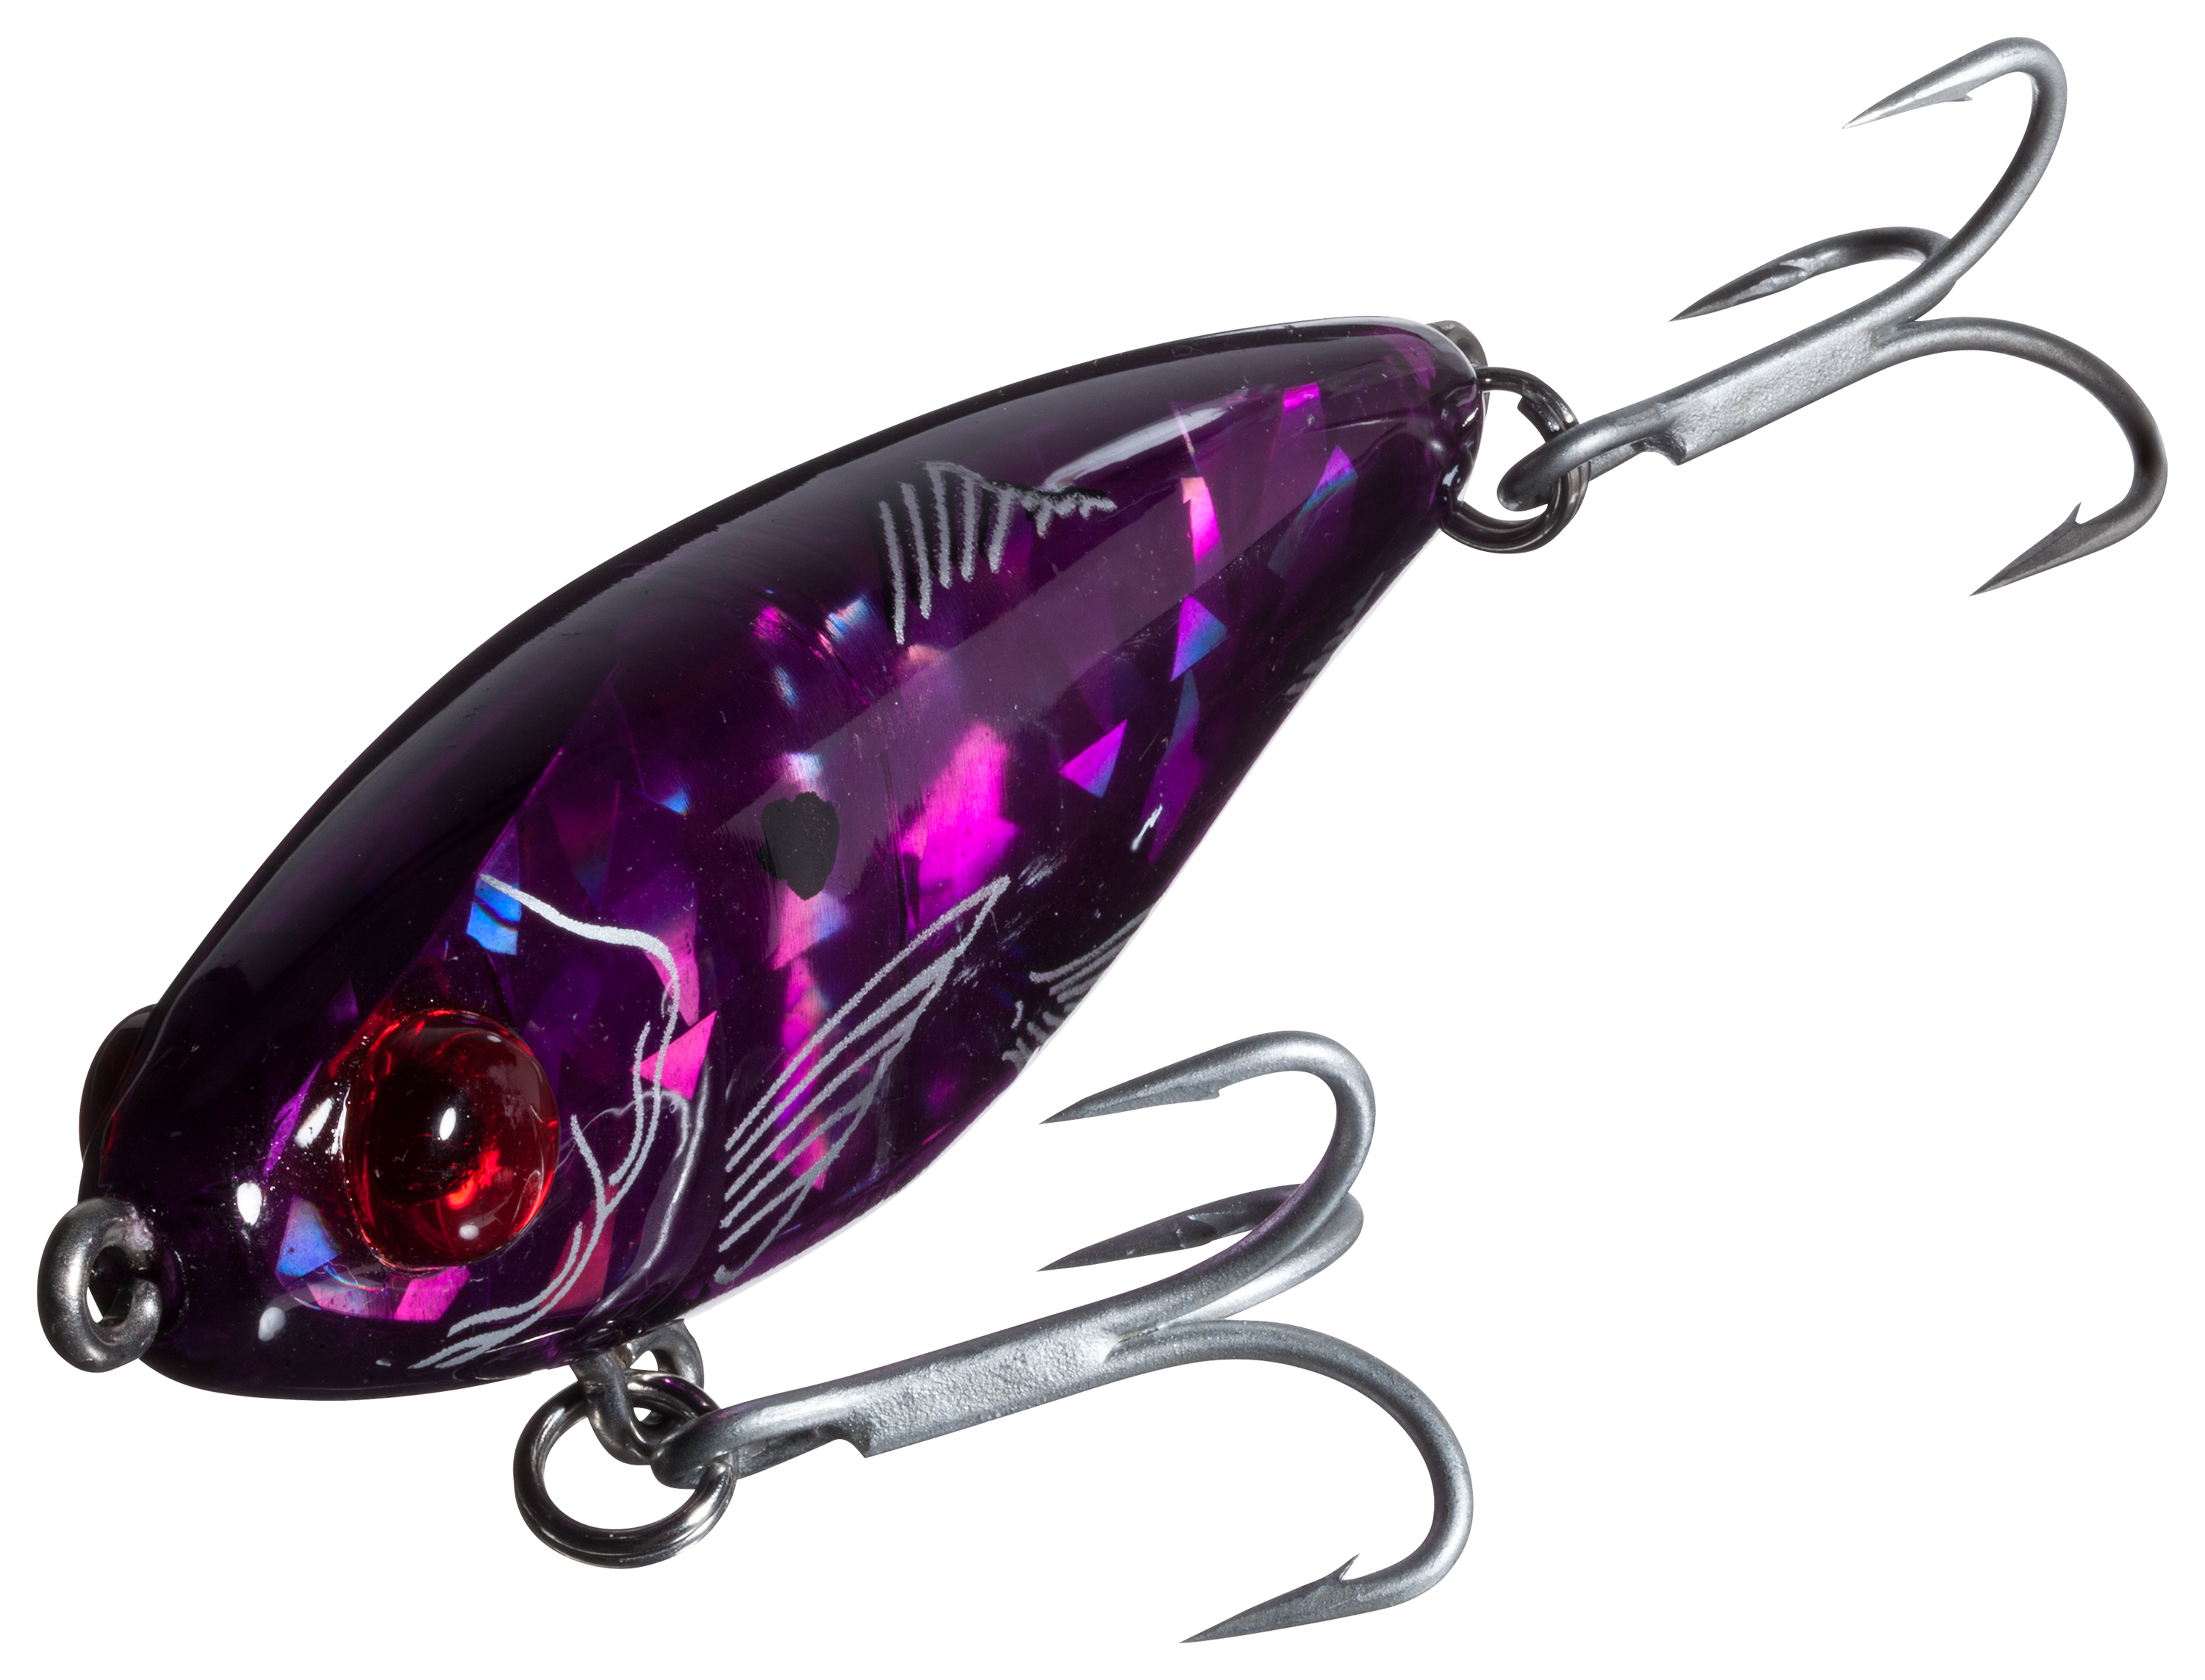 L&S Bait MirrOdine 2-5/8 In. Lure, Fluorescent Hot Pink/Chartreuse Belly